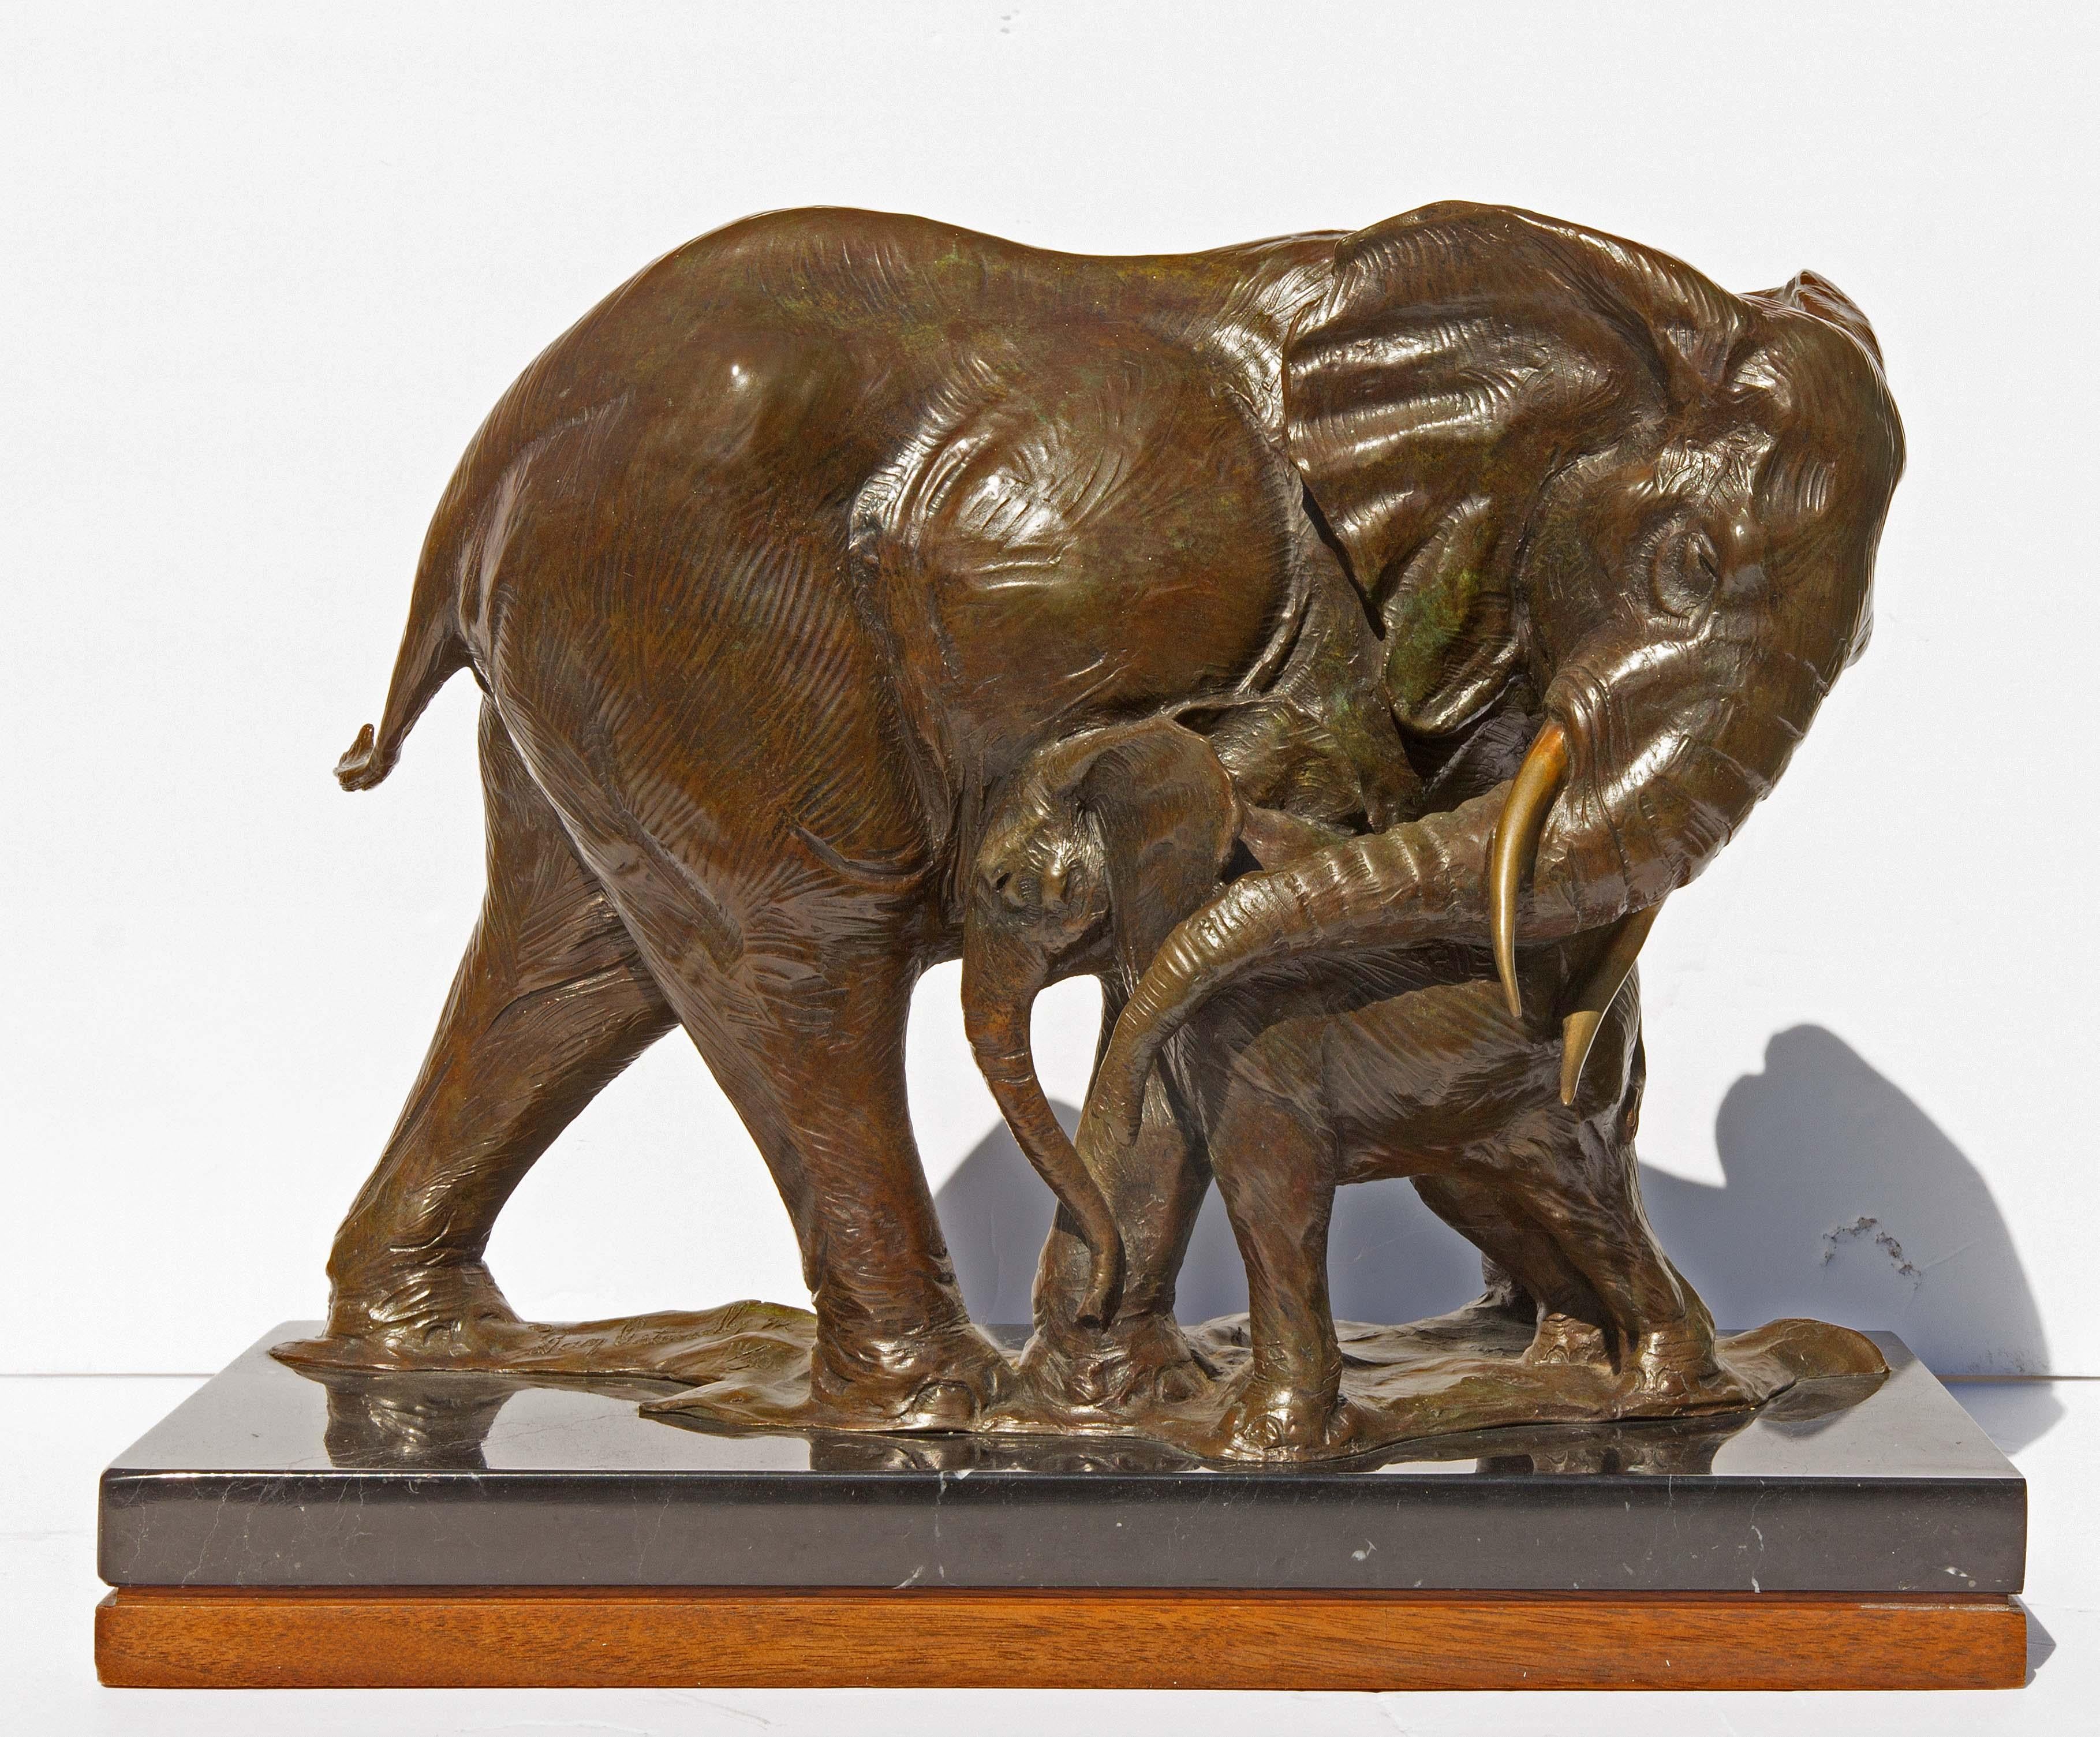 Poignant bronze sculpture of nurturing mother elephant and her calf. Rich brown patina with hints of verdigris. By American sculptor Dan Ostermiller. Signed and dated 1992. Casting number 14 out of 30. Mounted on marble and wood base.
One of